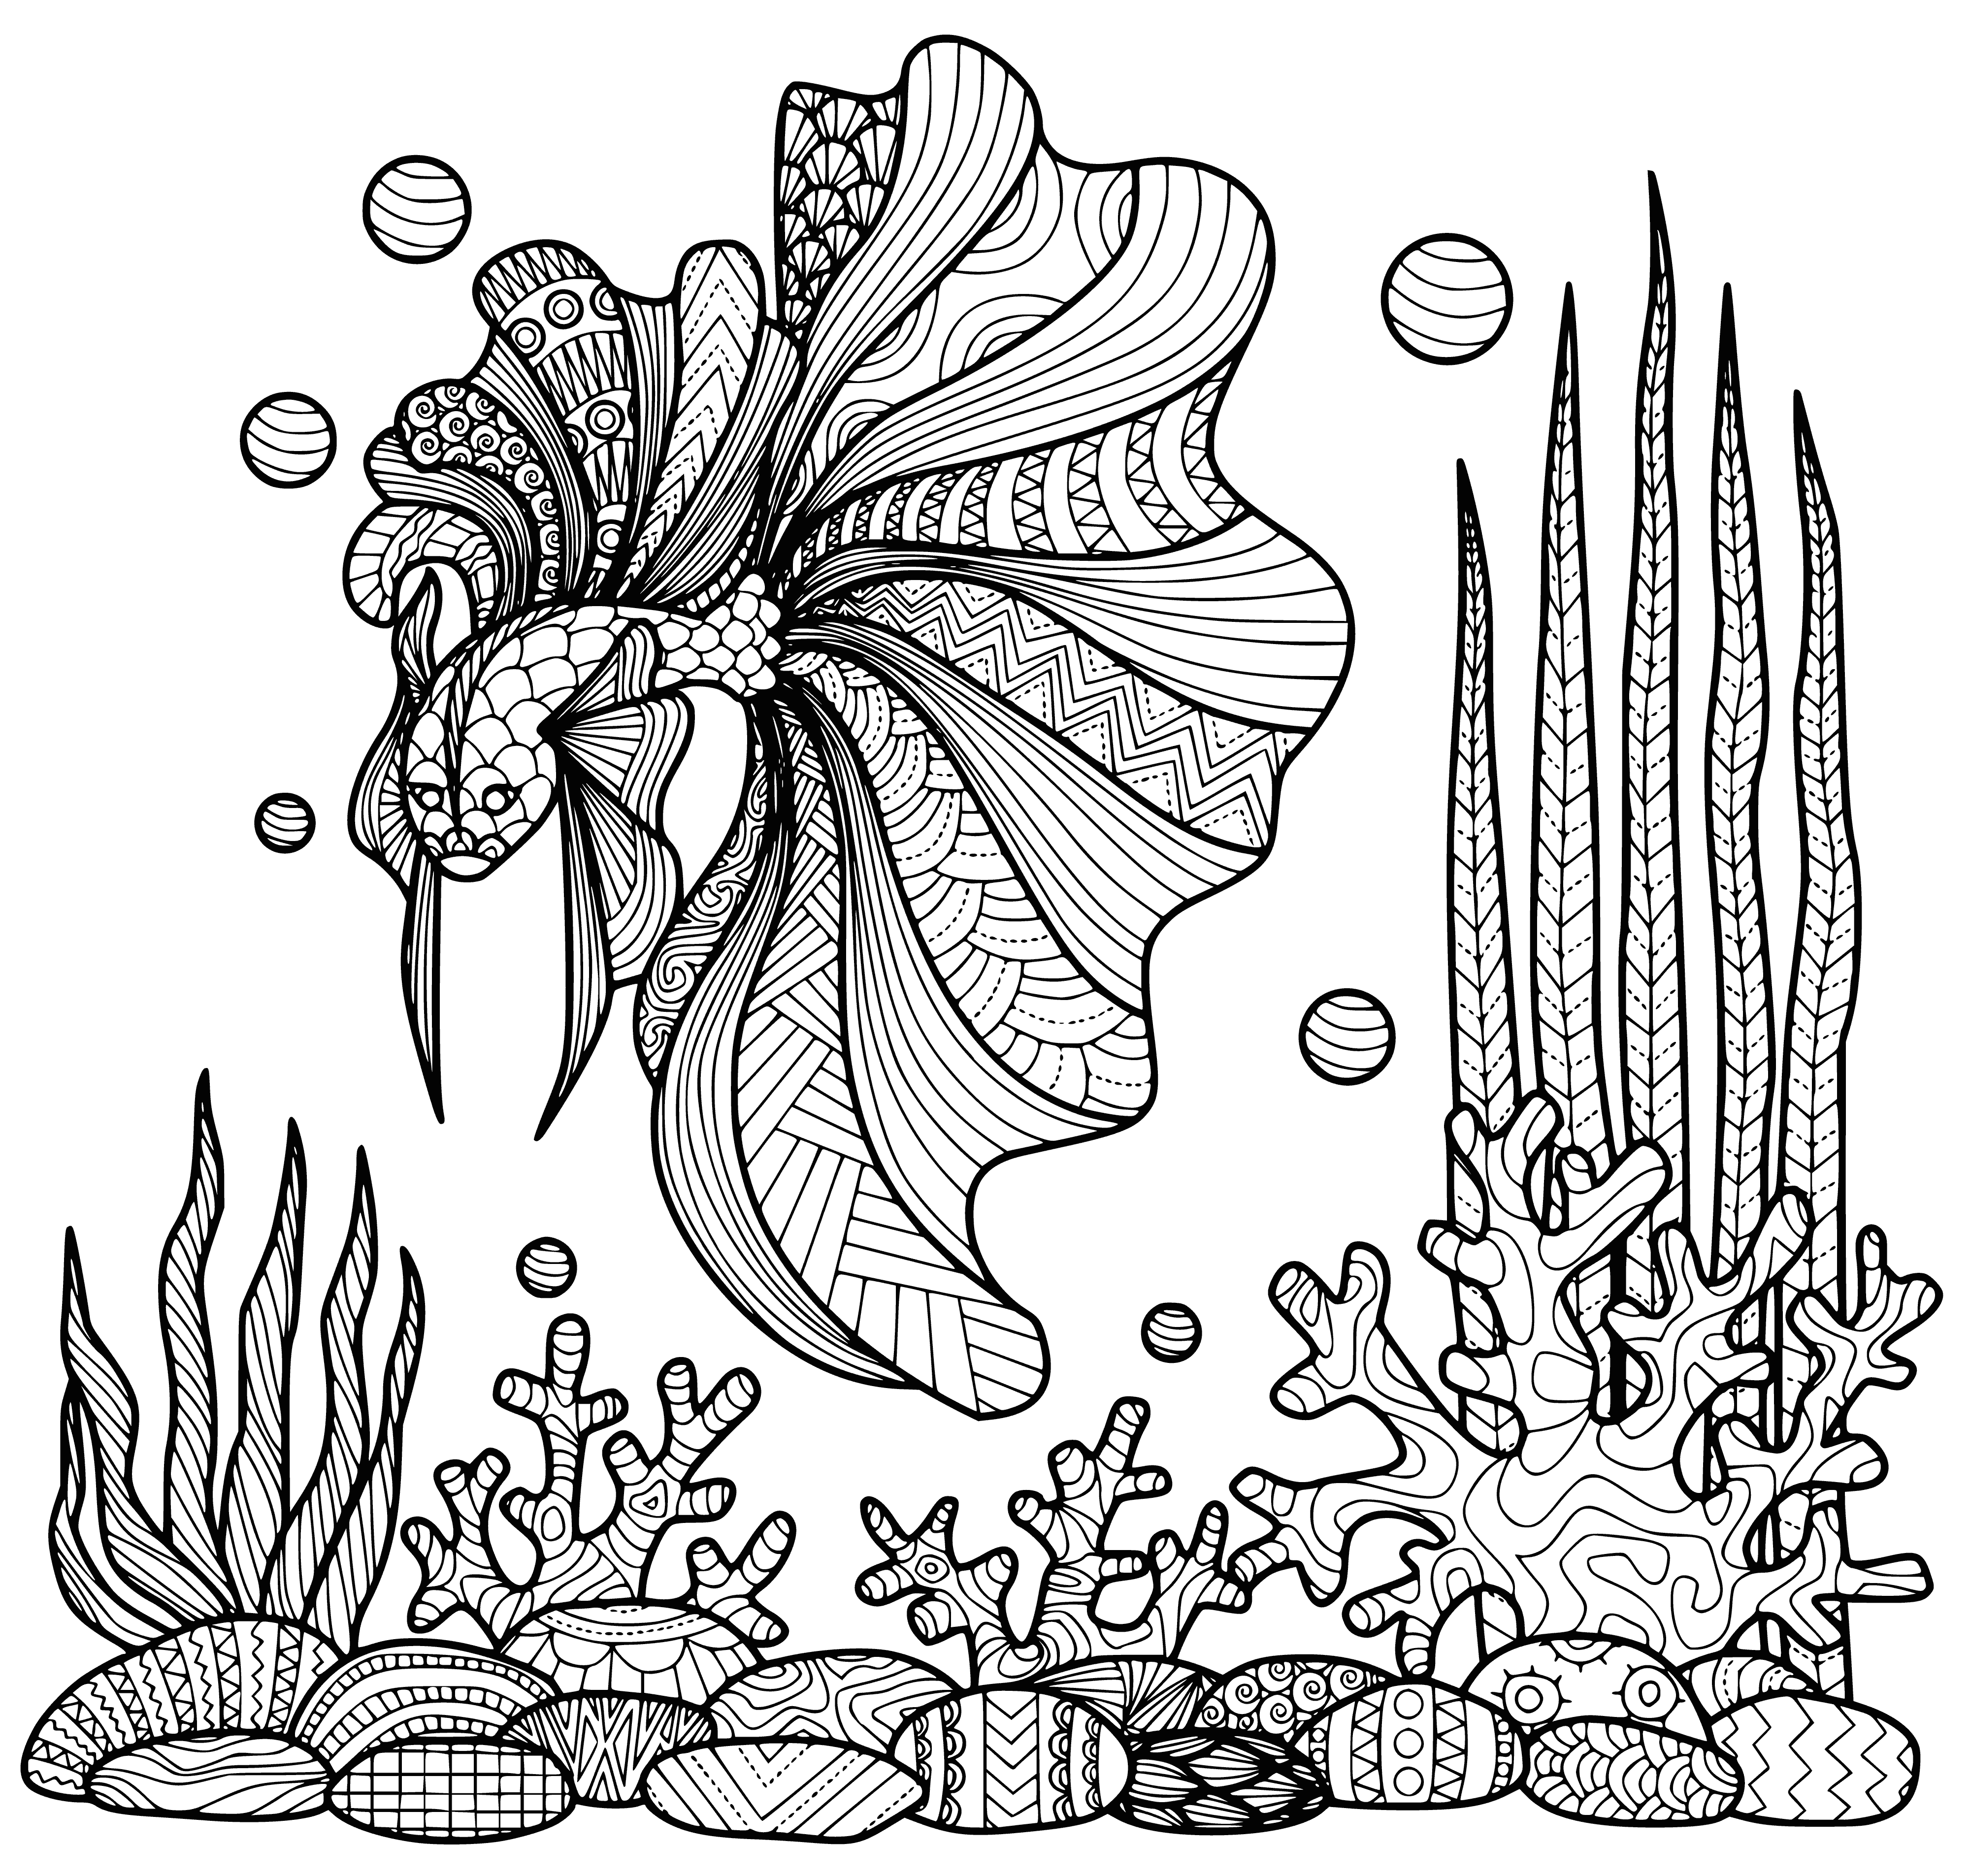 coloring page: Underwater scene with a large fish & smaller fish, coral, & seaweed - a perfect page to relax & color! #AdultColoring